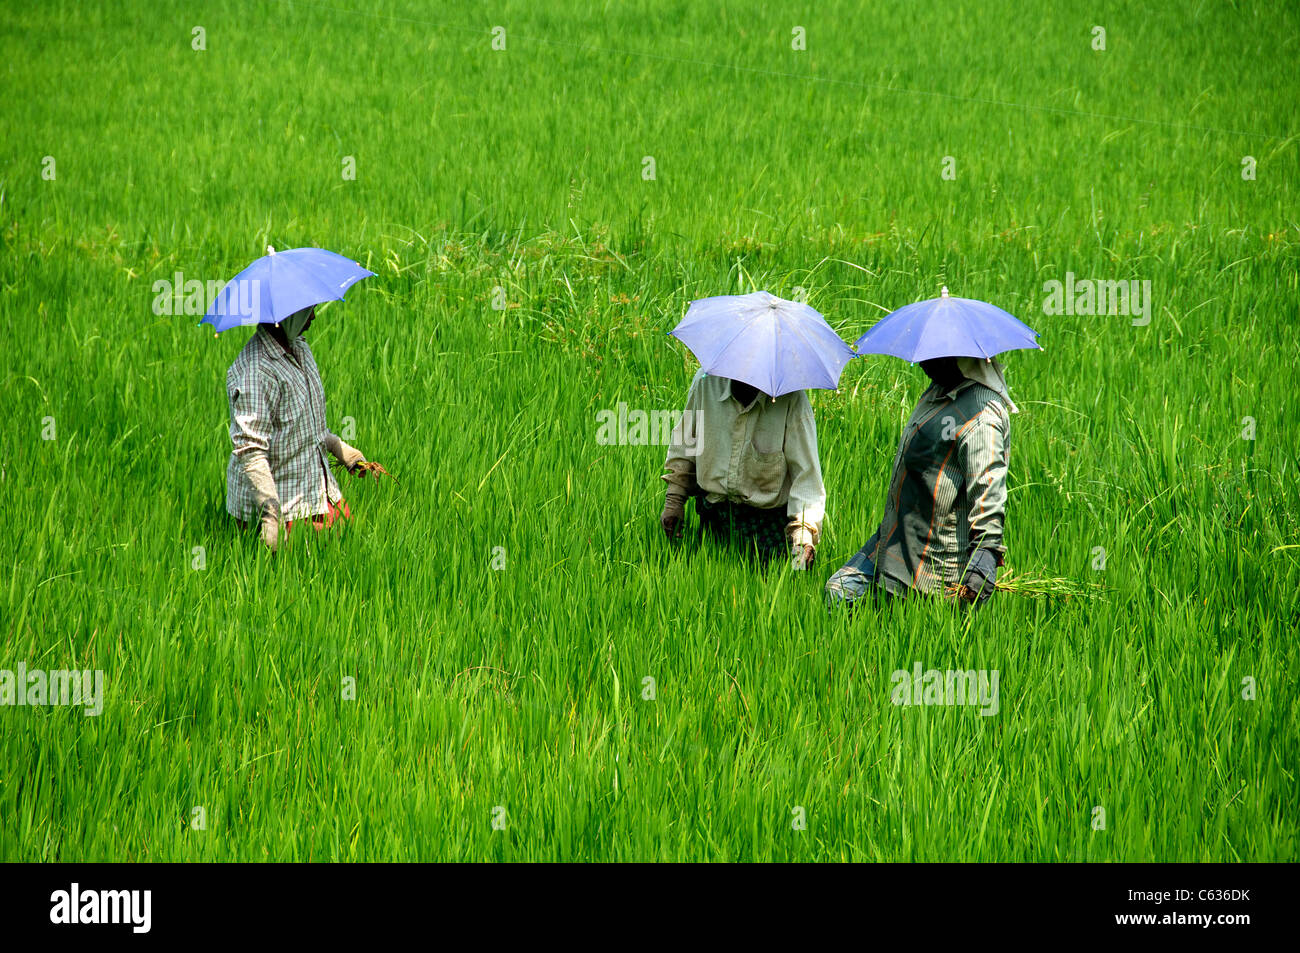 Thee people in rice paddy wearing umbrella hats Backwaters Kerala South India Stock Photo